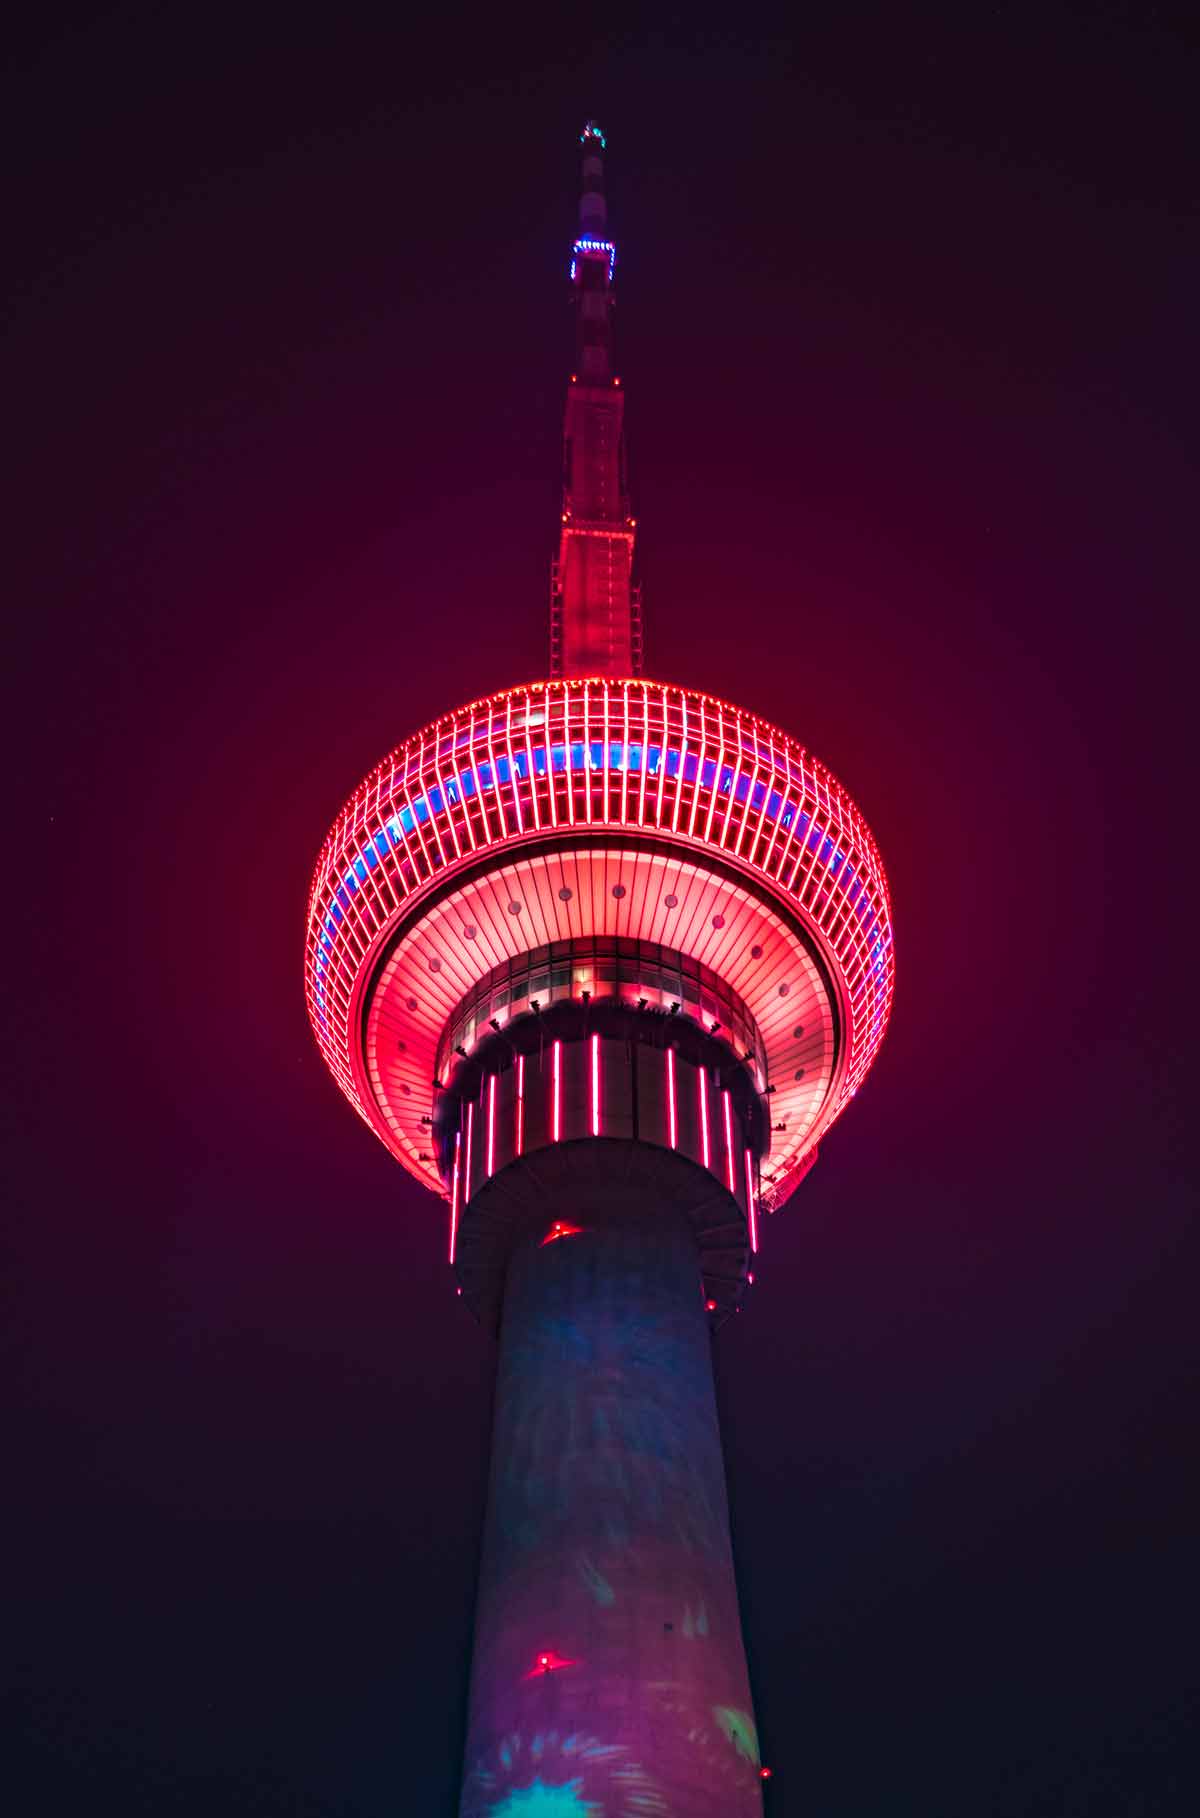 Beijing at night the Central Radio and Television Tower